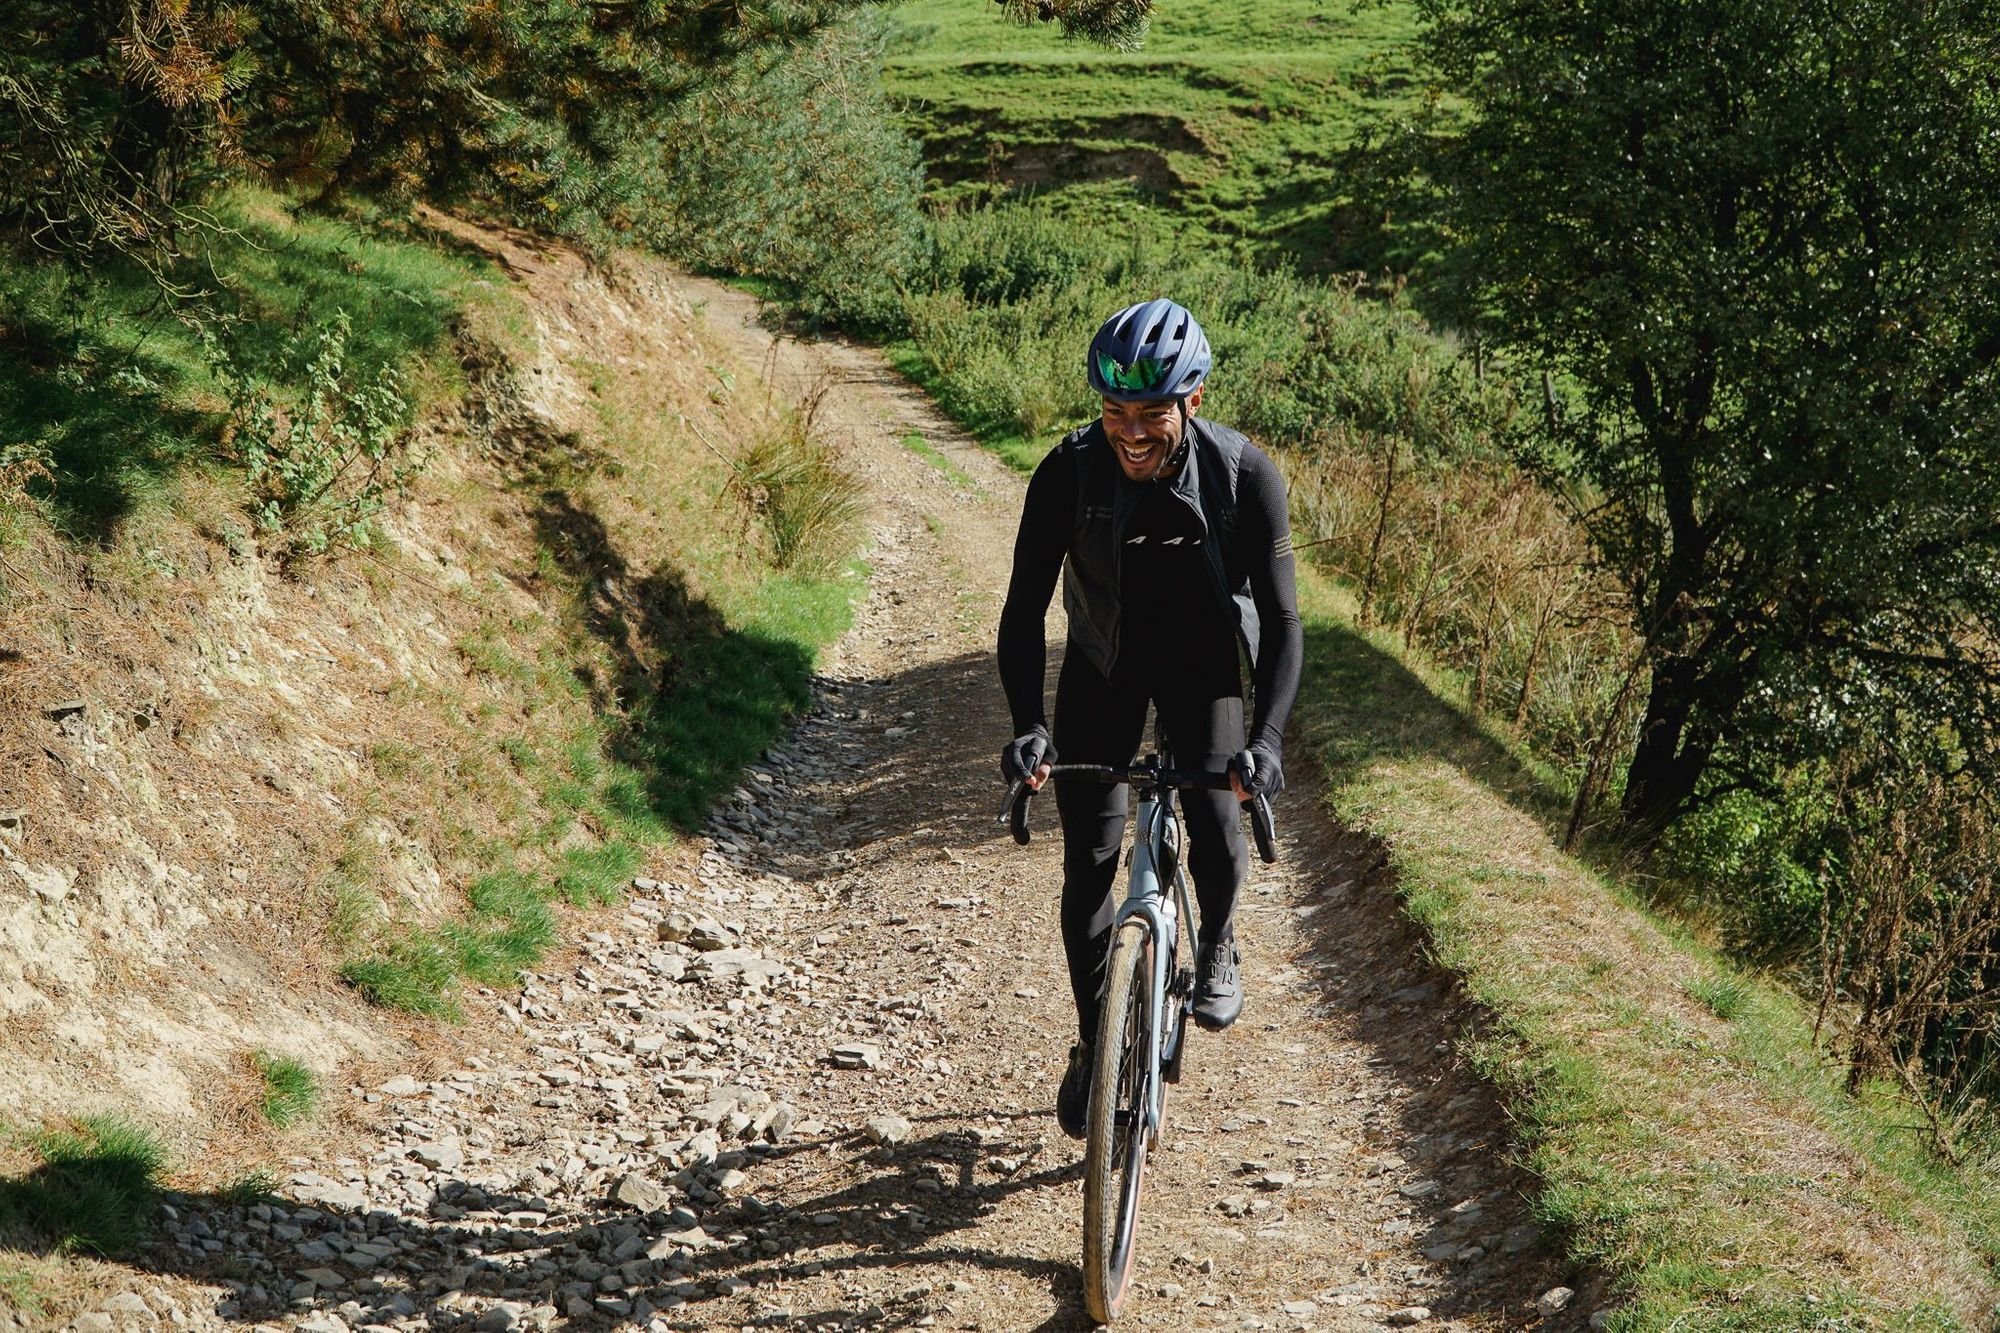 Gravel cycling has a more relaxed attitude than road riding, with the emphasis on exploration. Photo: Wild Cycles